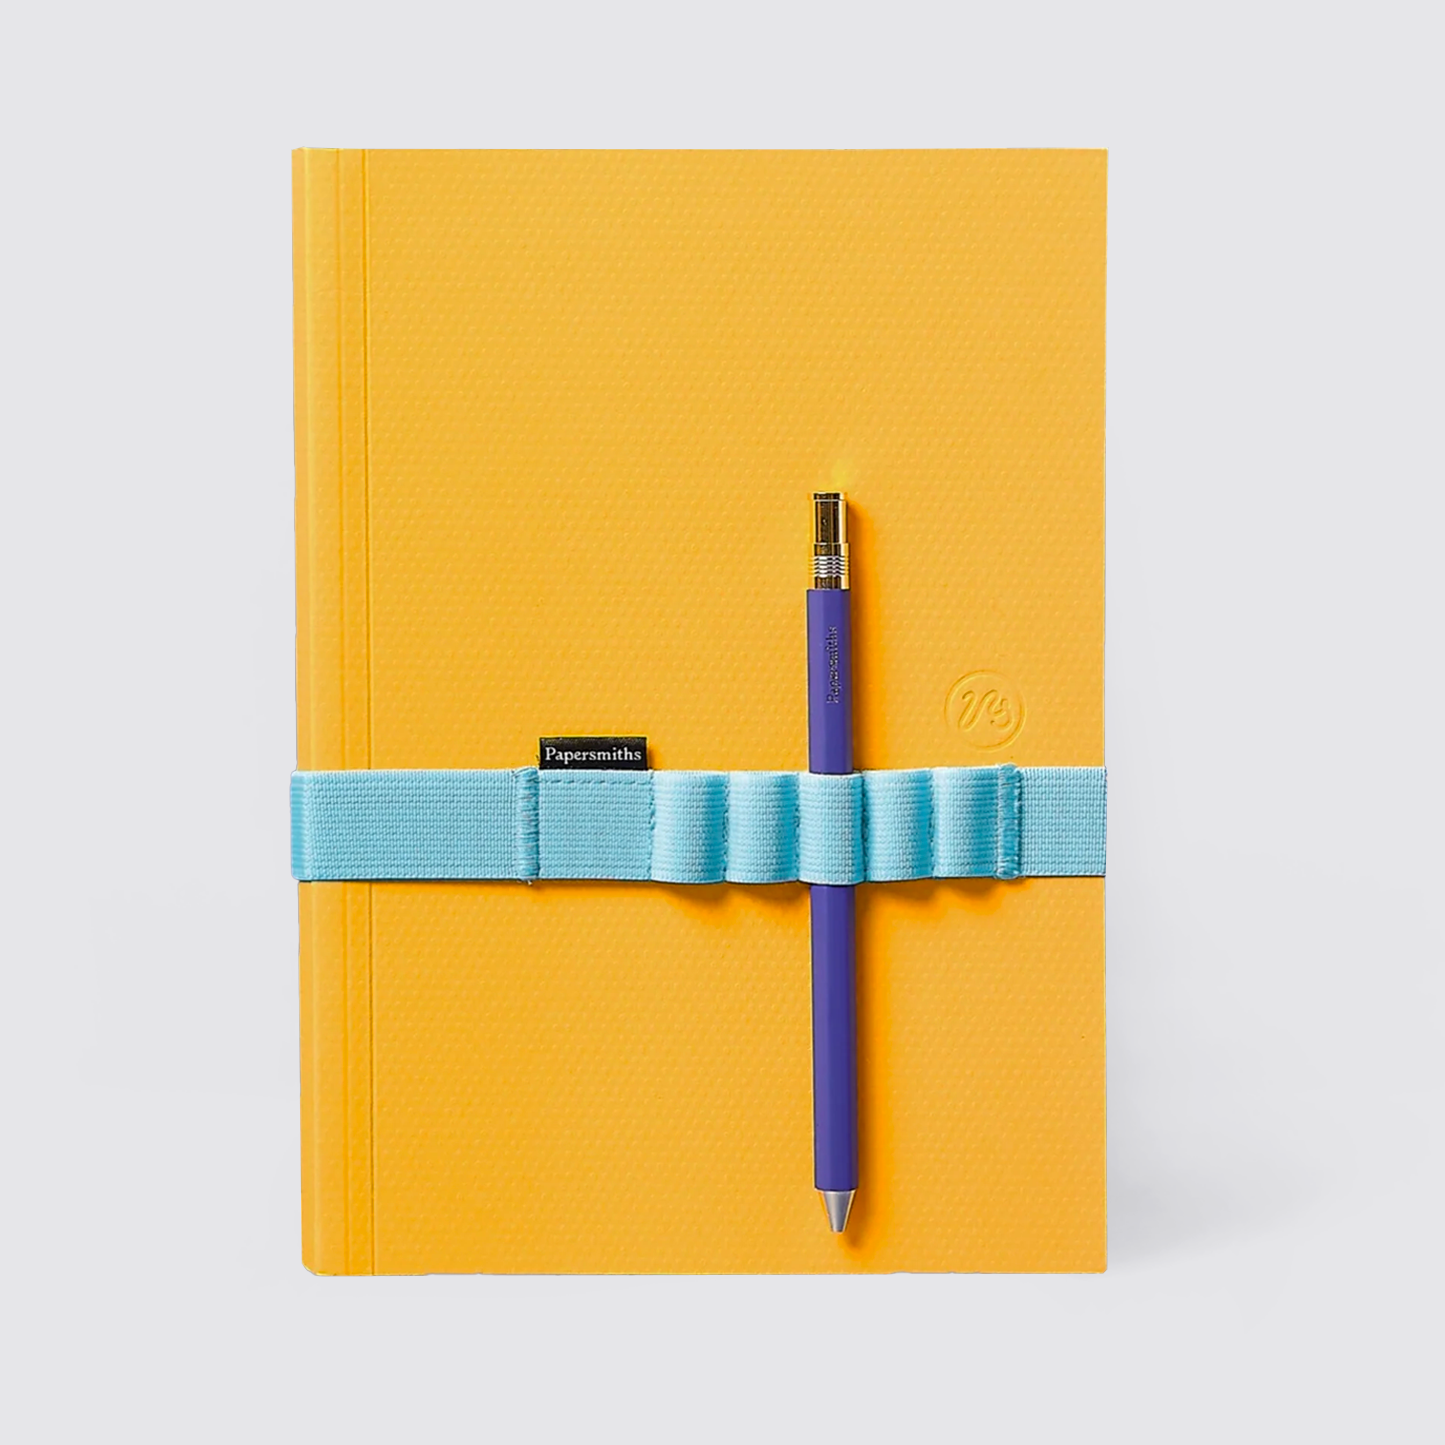 Papersmiths Notebook, Pen And Band Trio - Yolk